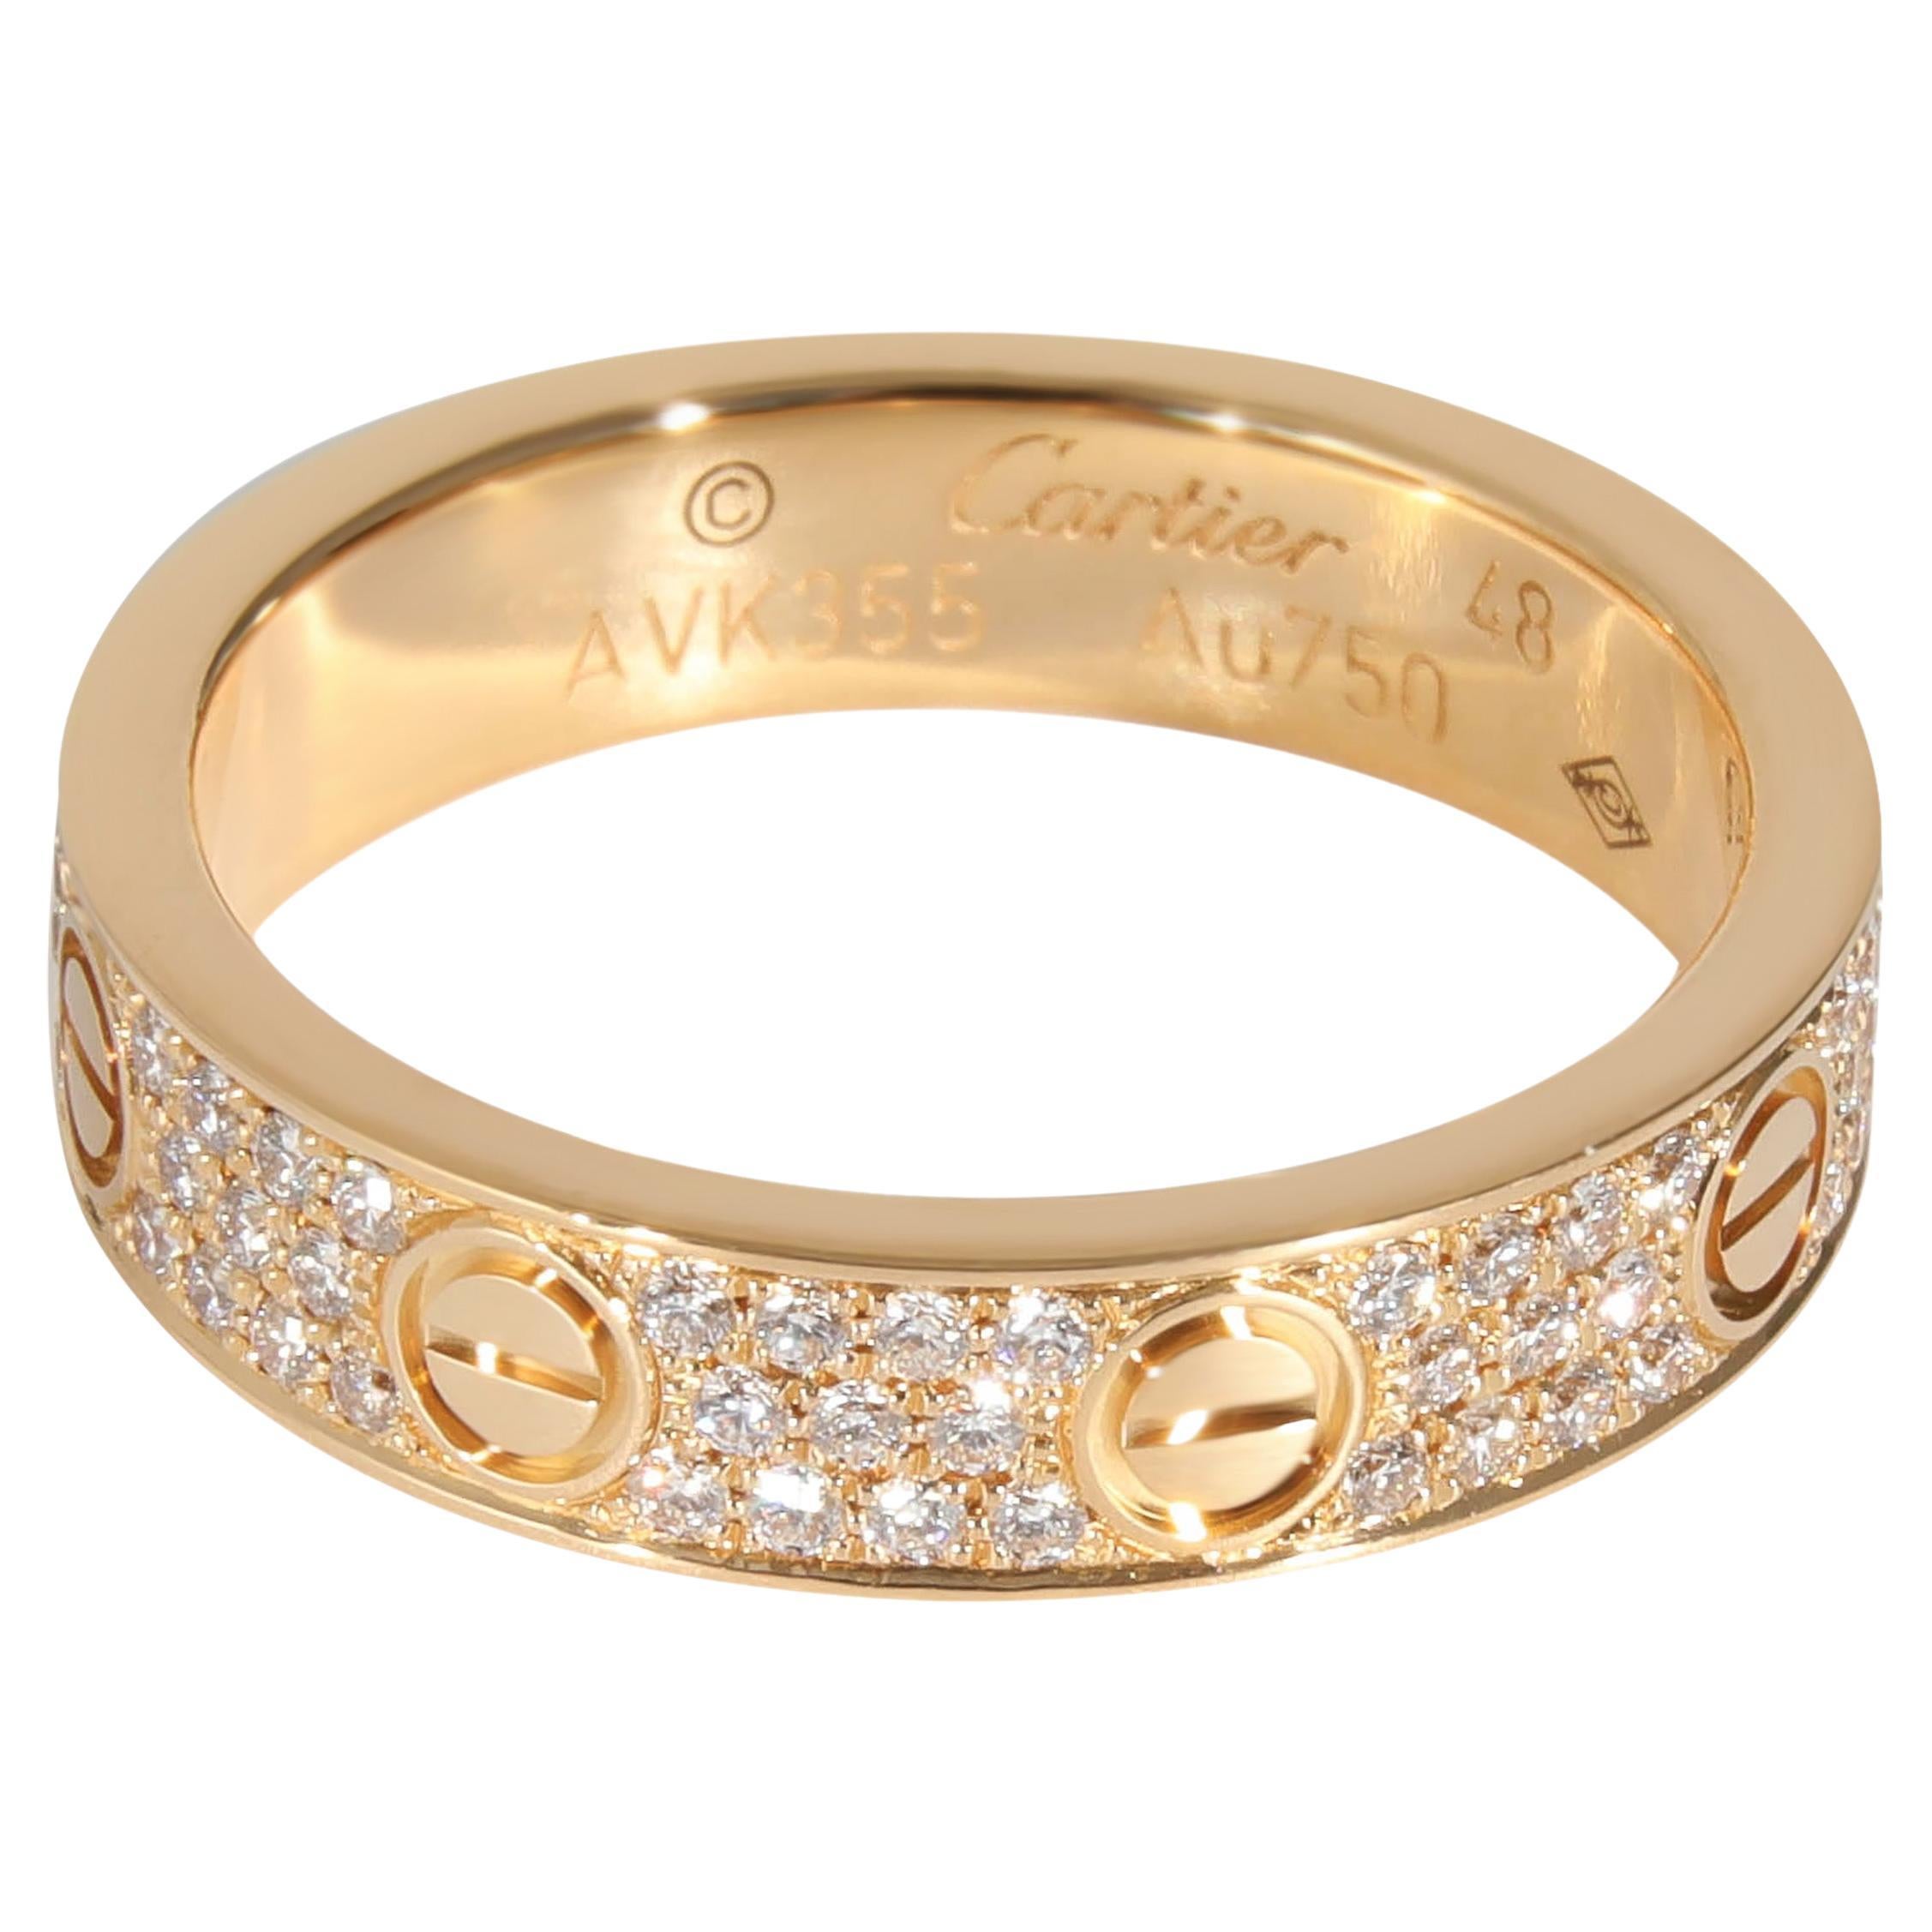 Cartier Love Diamond Ring in 18k Yellow Gold 0.31 Ctw